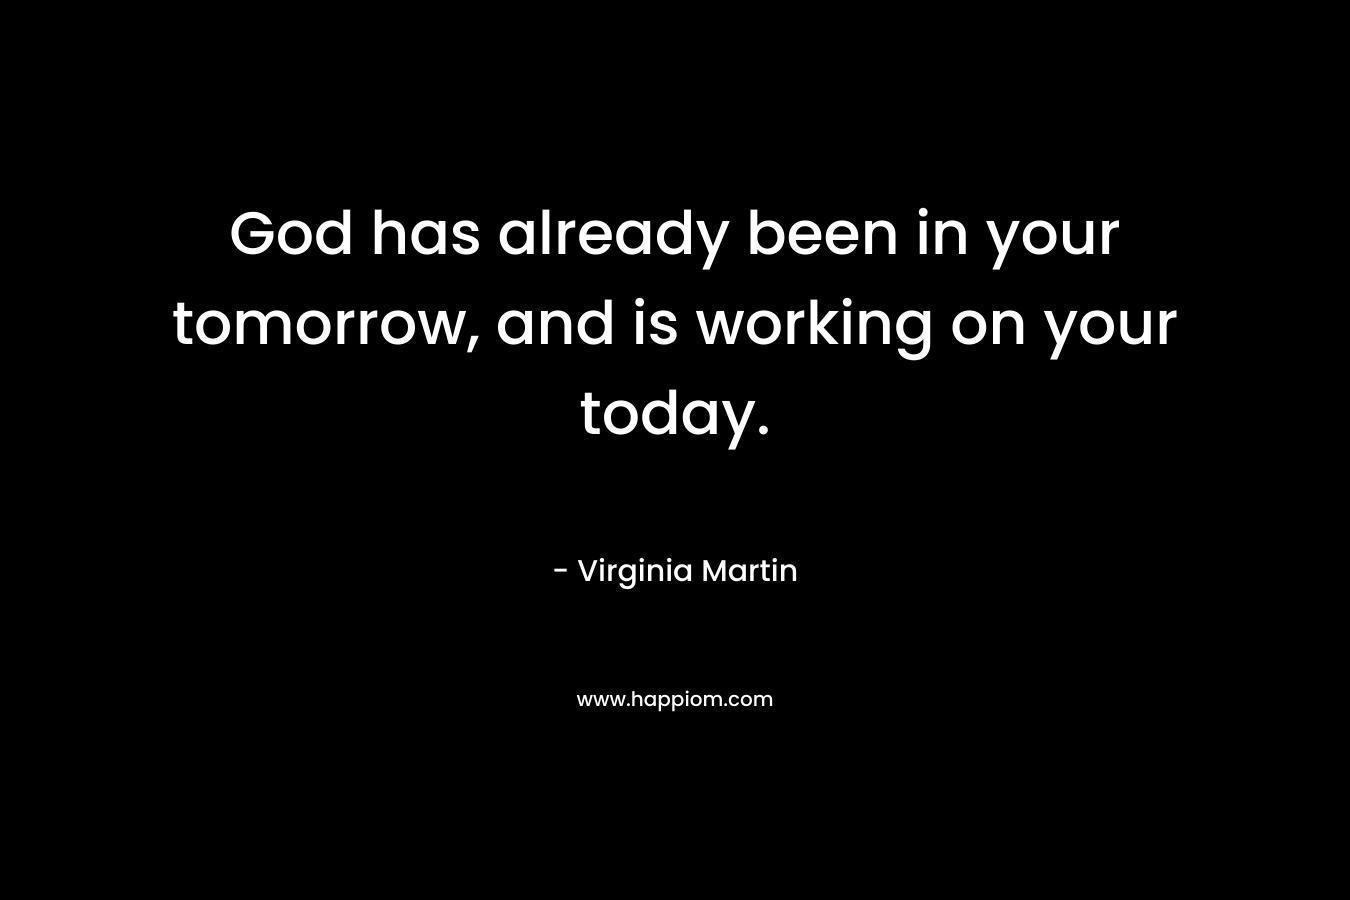 God has already been in your tomorrow, and is working on your today.